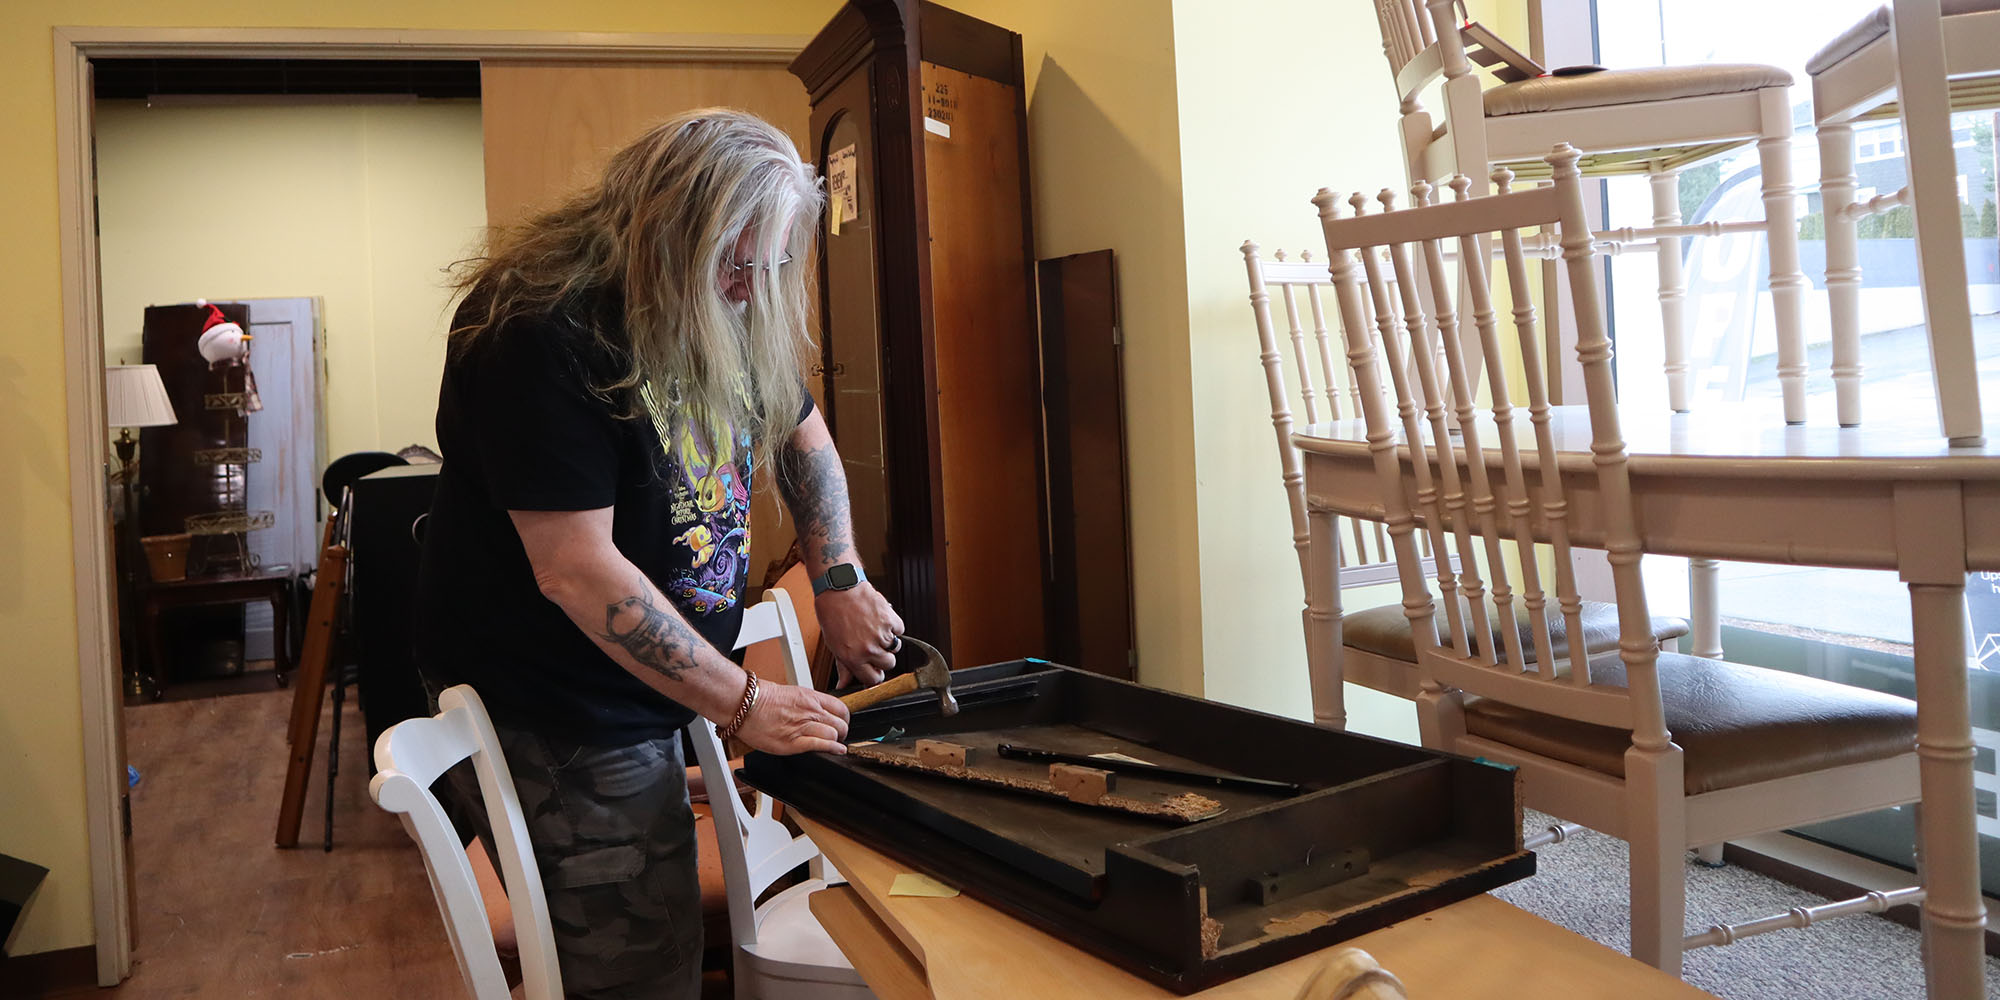 Photo of a man with long hair and beard working with a hammer on a piece of furniture.